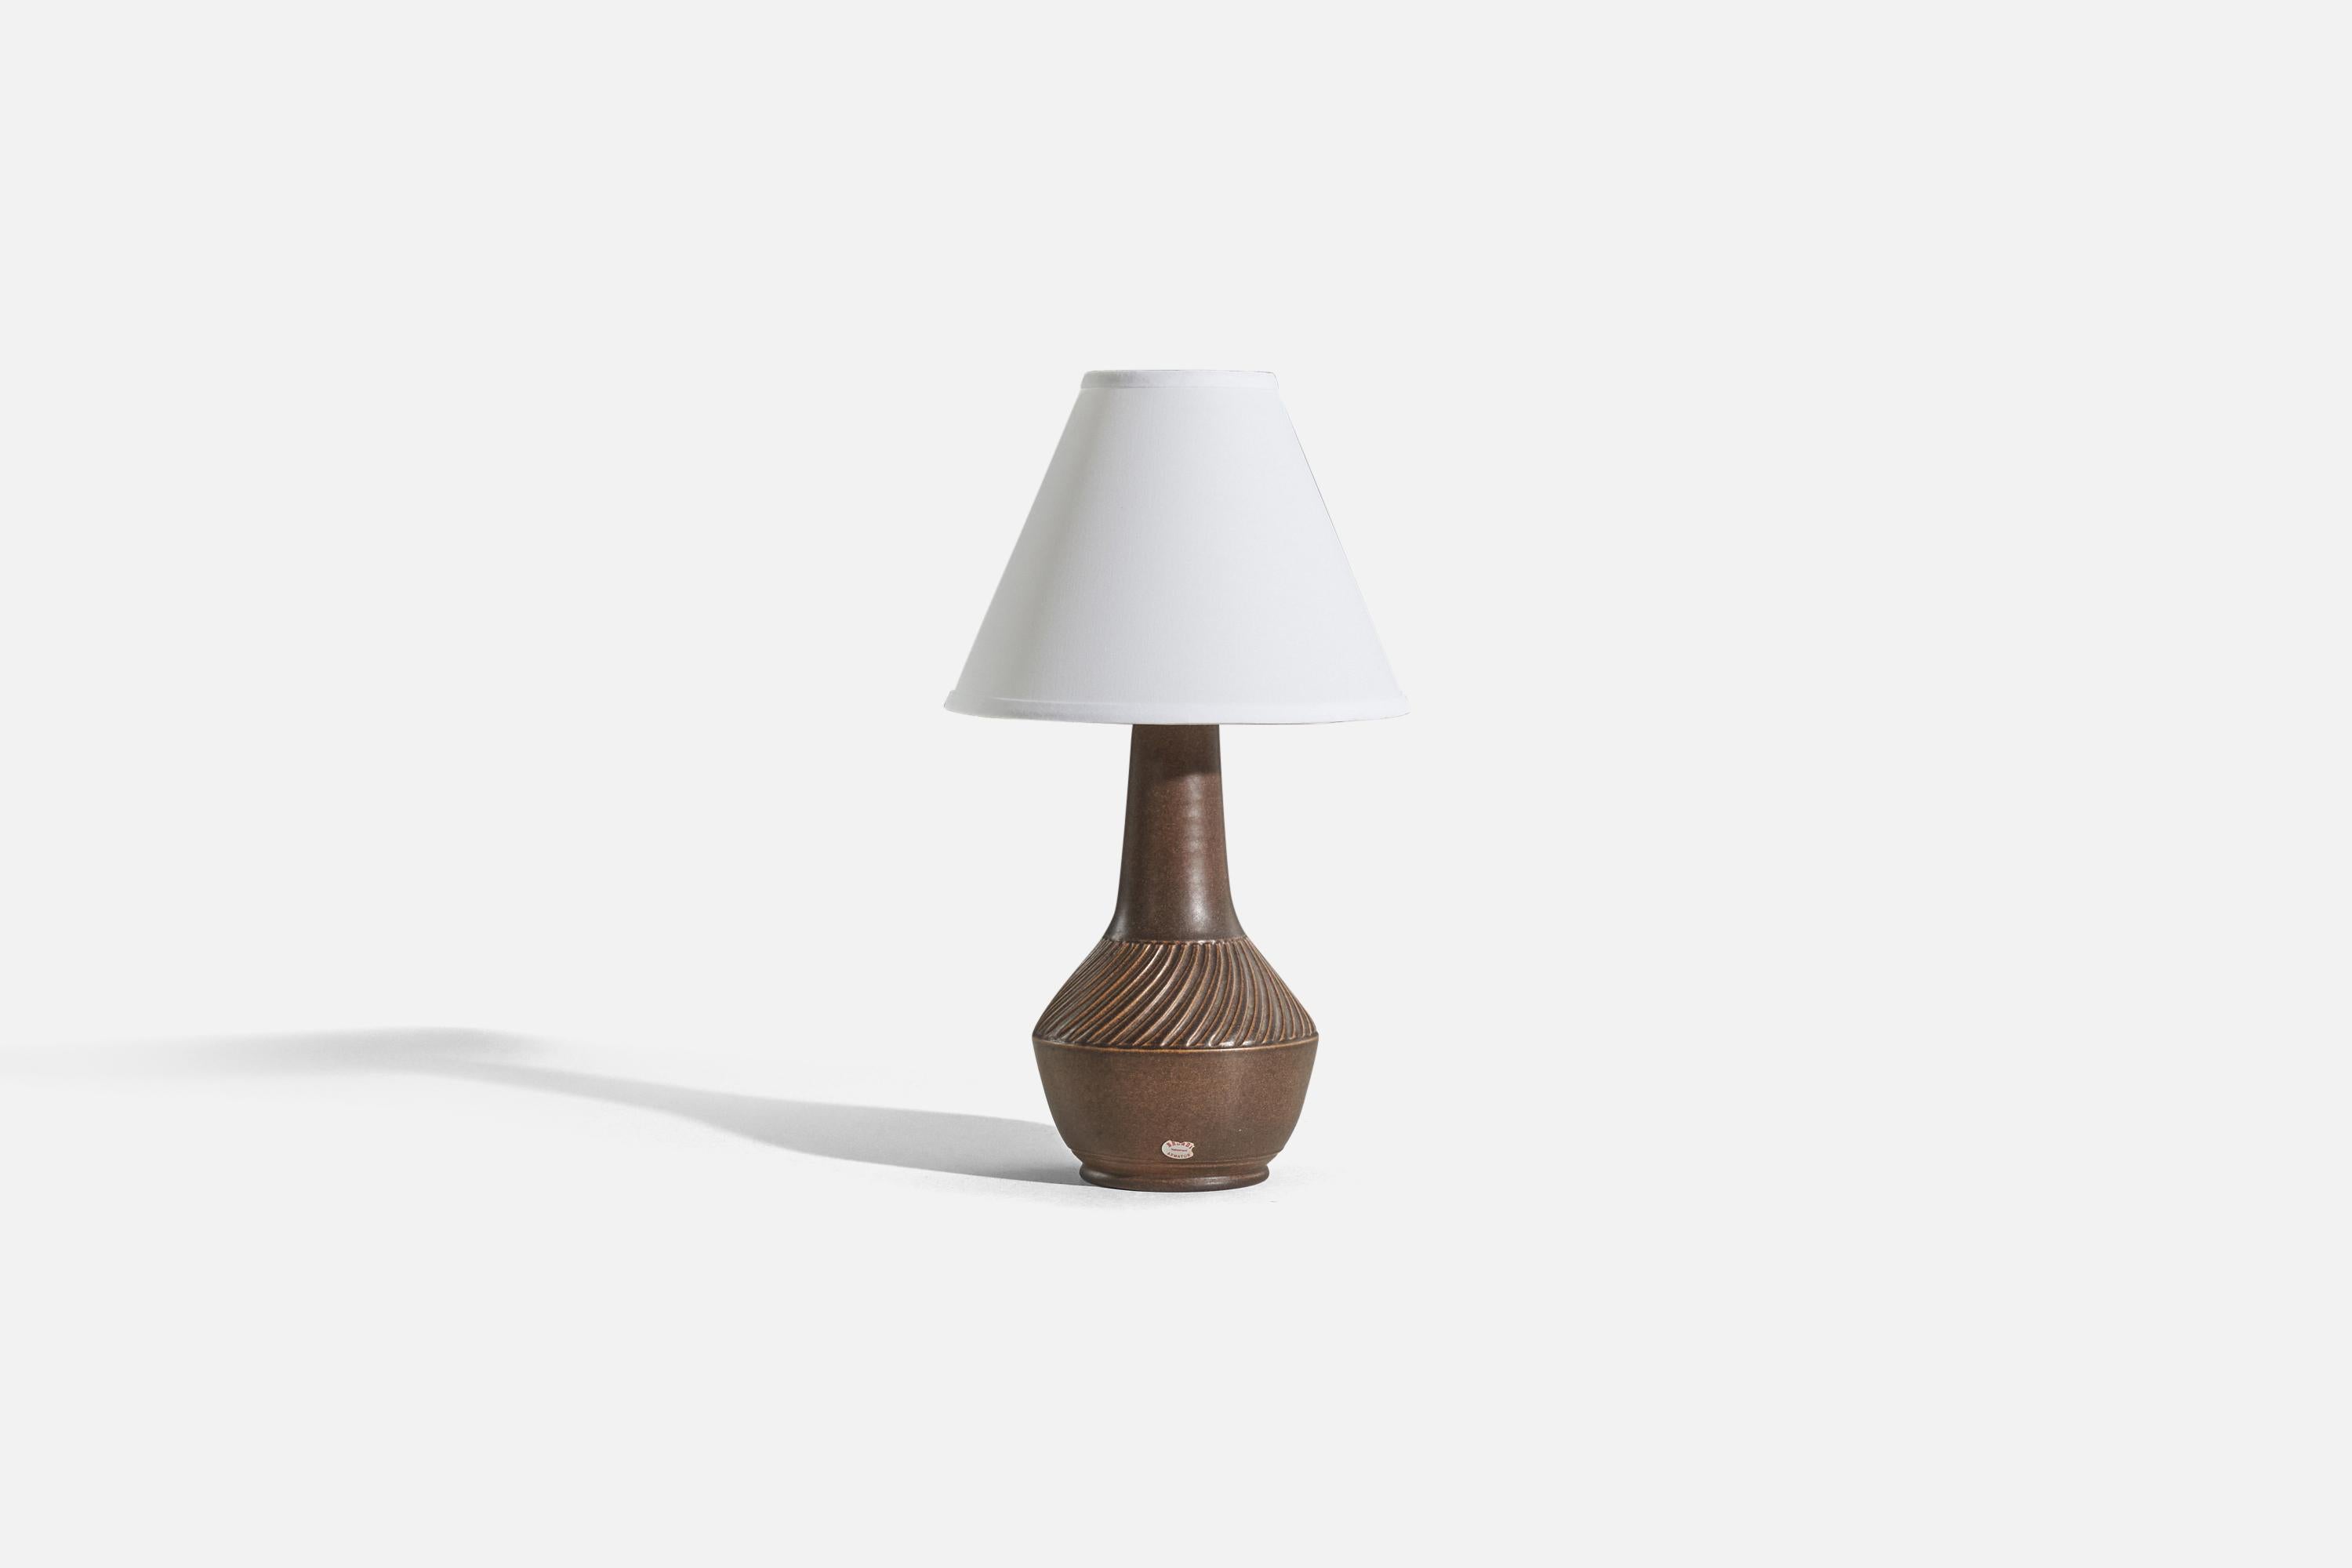 A brown, glazed stoneware table lamp designed by Henry Brandi and produced by his own firm, Brandi Vejbystrand, Sweden, 1960s. 

Sold without lampshade. 
Dimensions of Lamp (inches) : 13.3125 x 6.5 x 6.5 (H x W x D)
Dimensions of Shade (inches) :